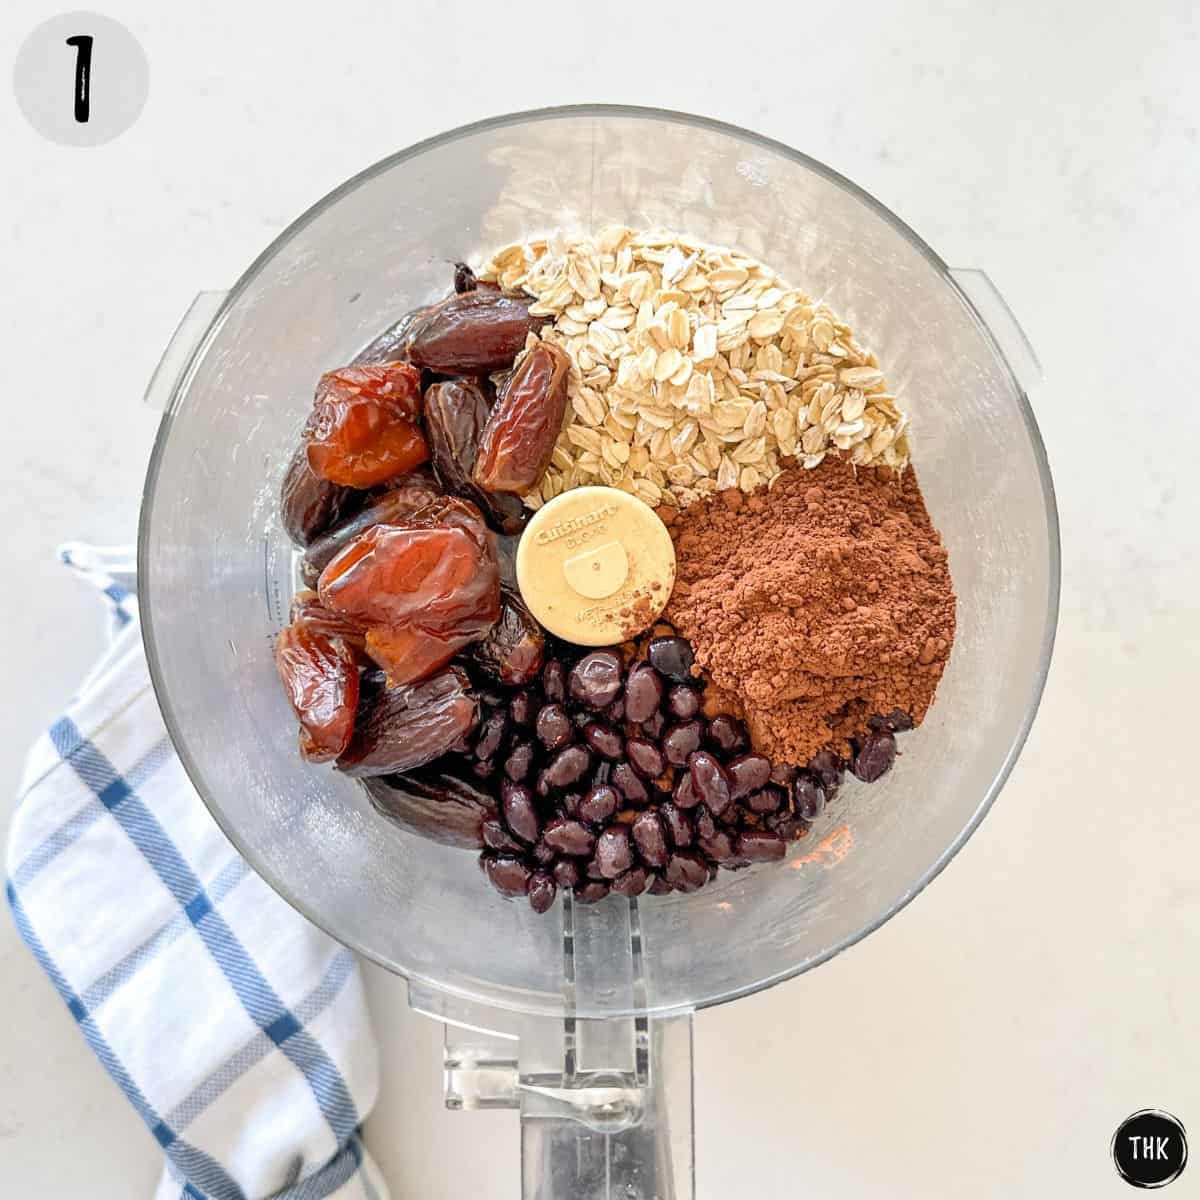 Food processor with oats, dates, black beans, and cocoa powder inside.